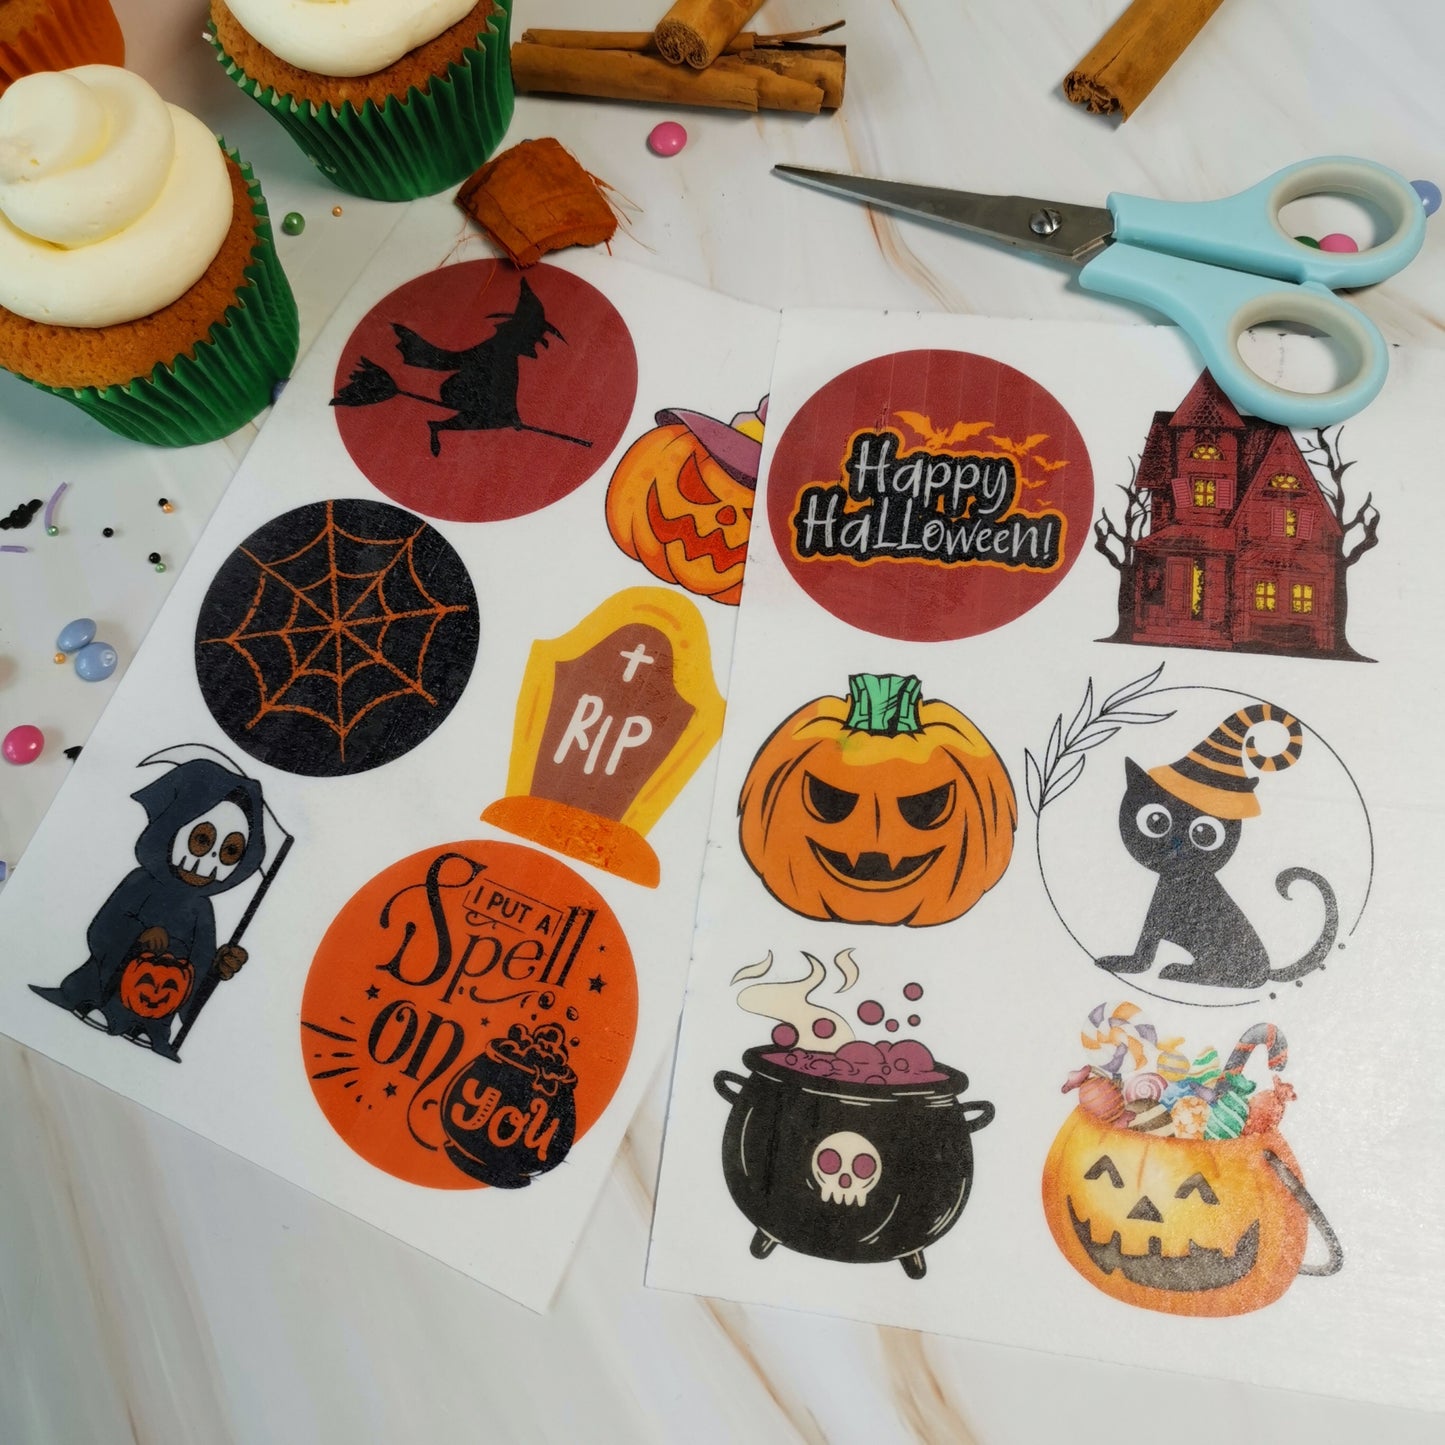 Halloween Cupcakes - the Ultimate Bake and Craft Kit for any child